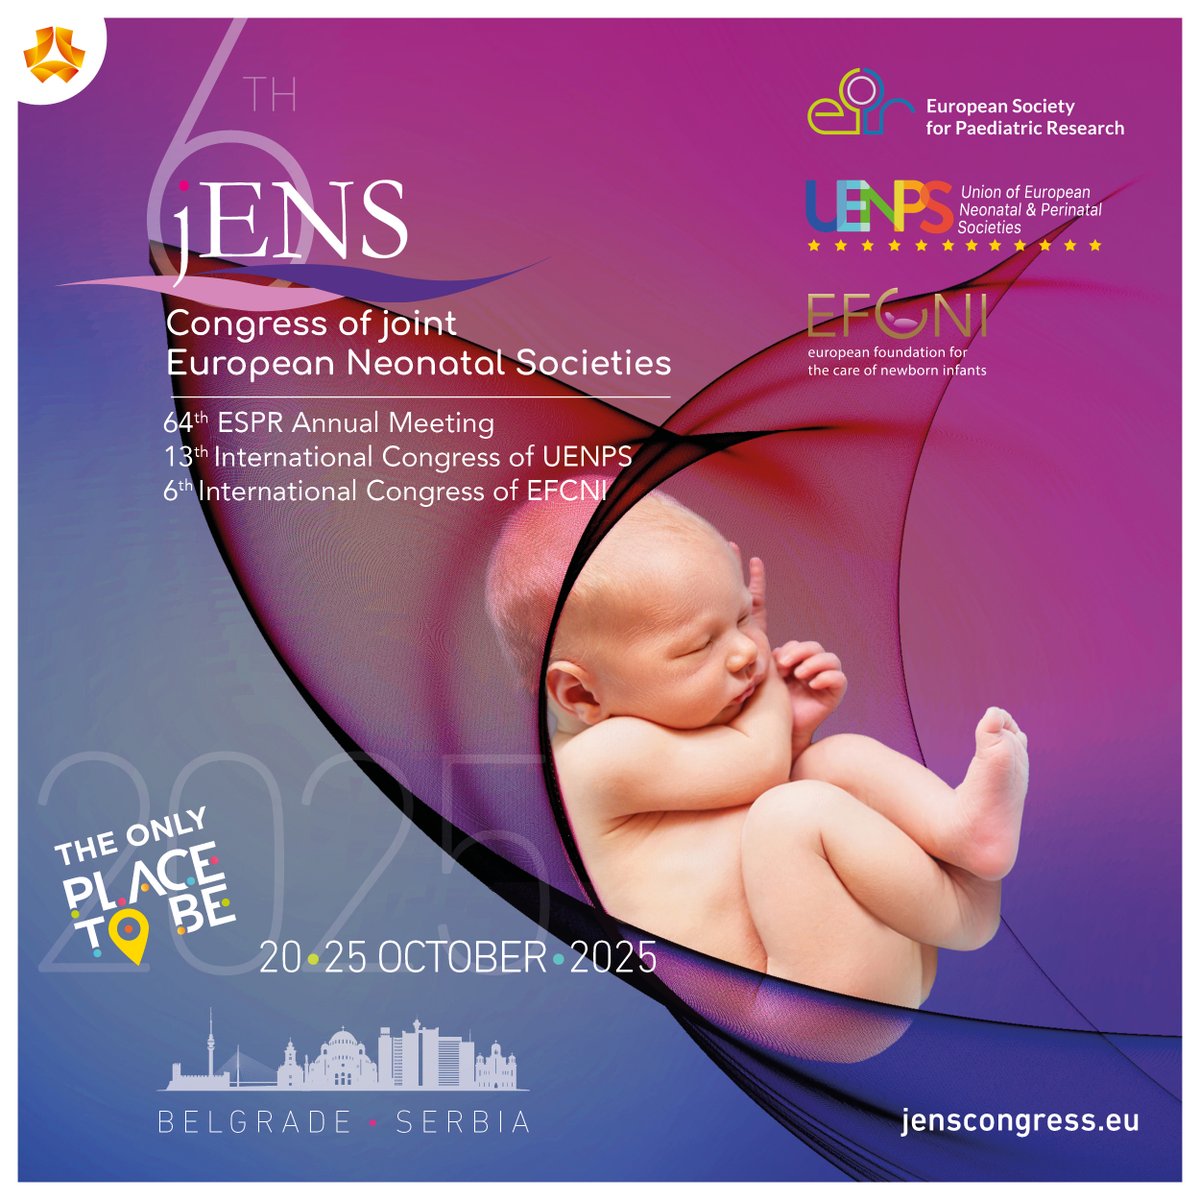 Join us next year for the 6th #jENScongress from 20-25 October in Belgrade 🇷🇸 Mark your calendars for this premier congress in #NeonatalMedicine, to be attended by world-renowned experts in the field and international representatives of the scientific community!